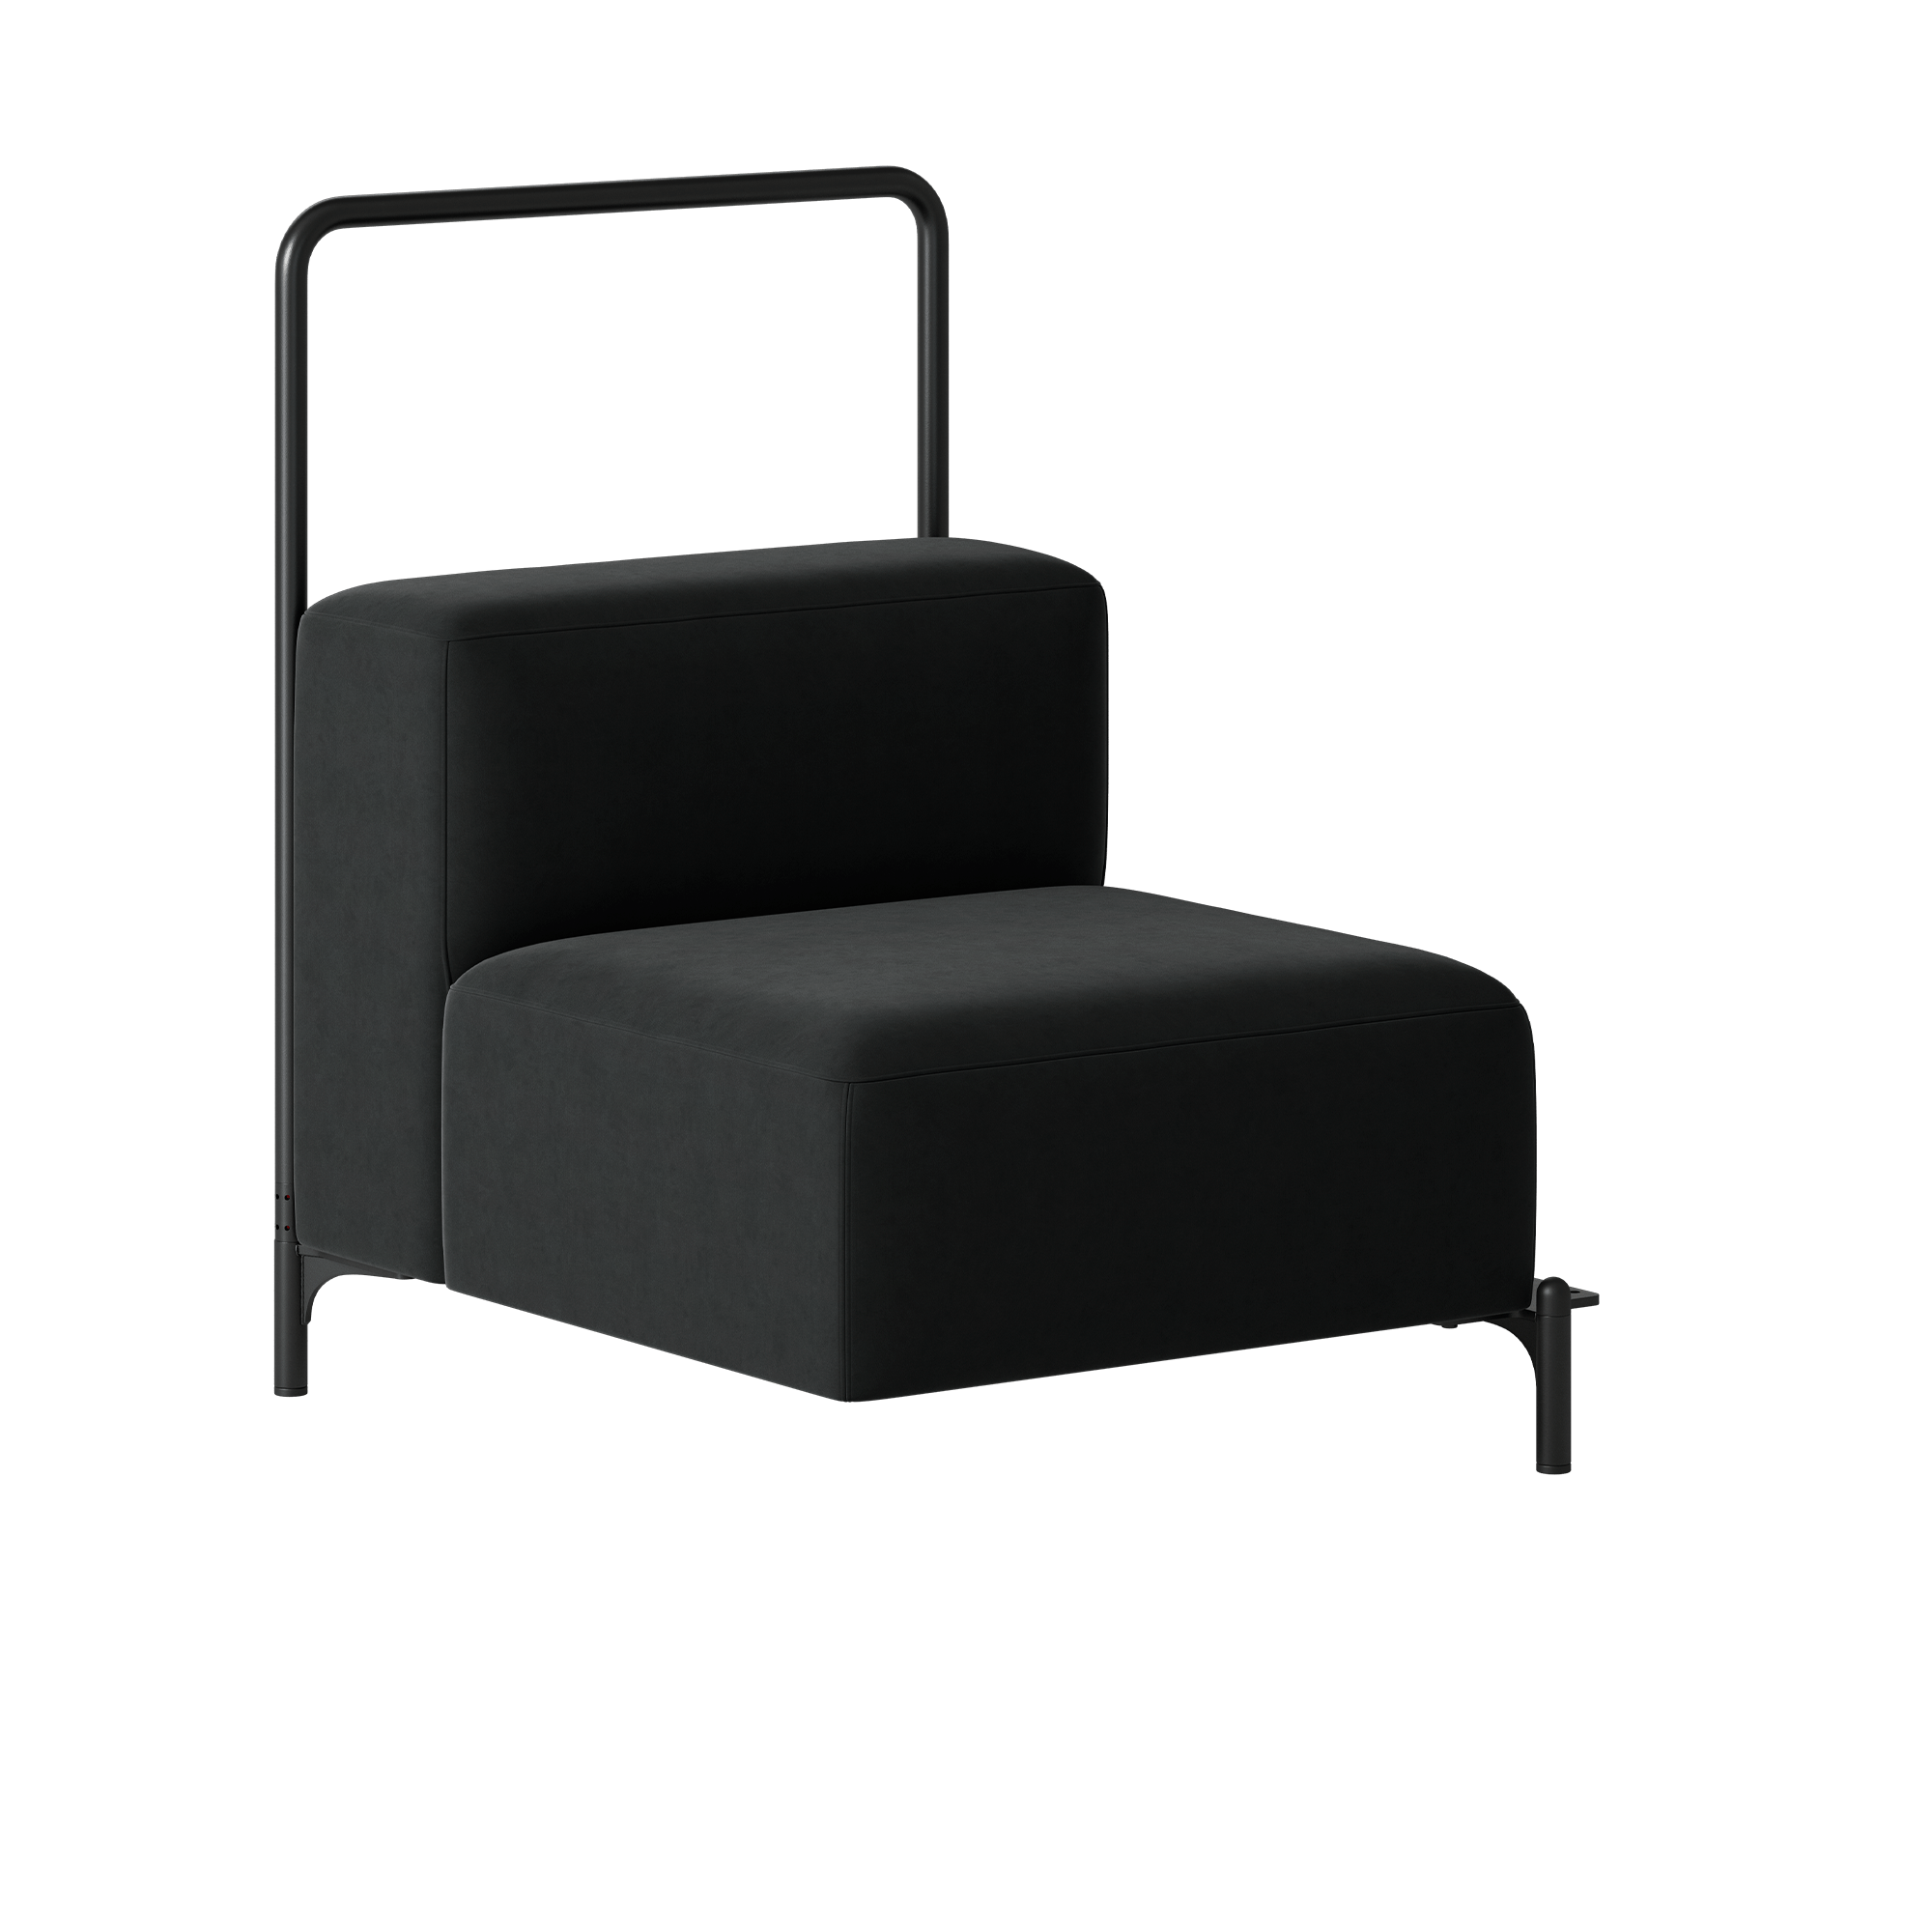 A black lounge chair with metal frame